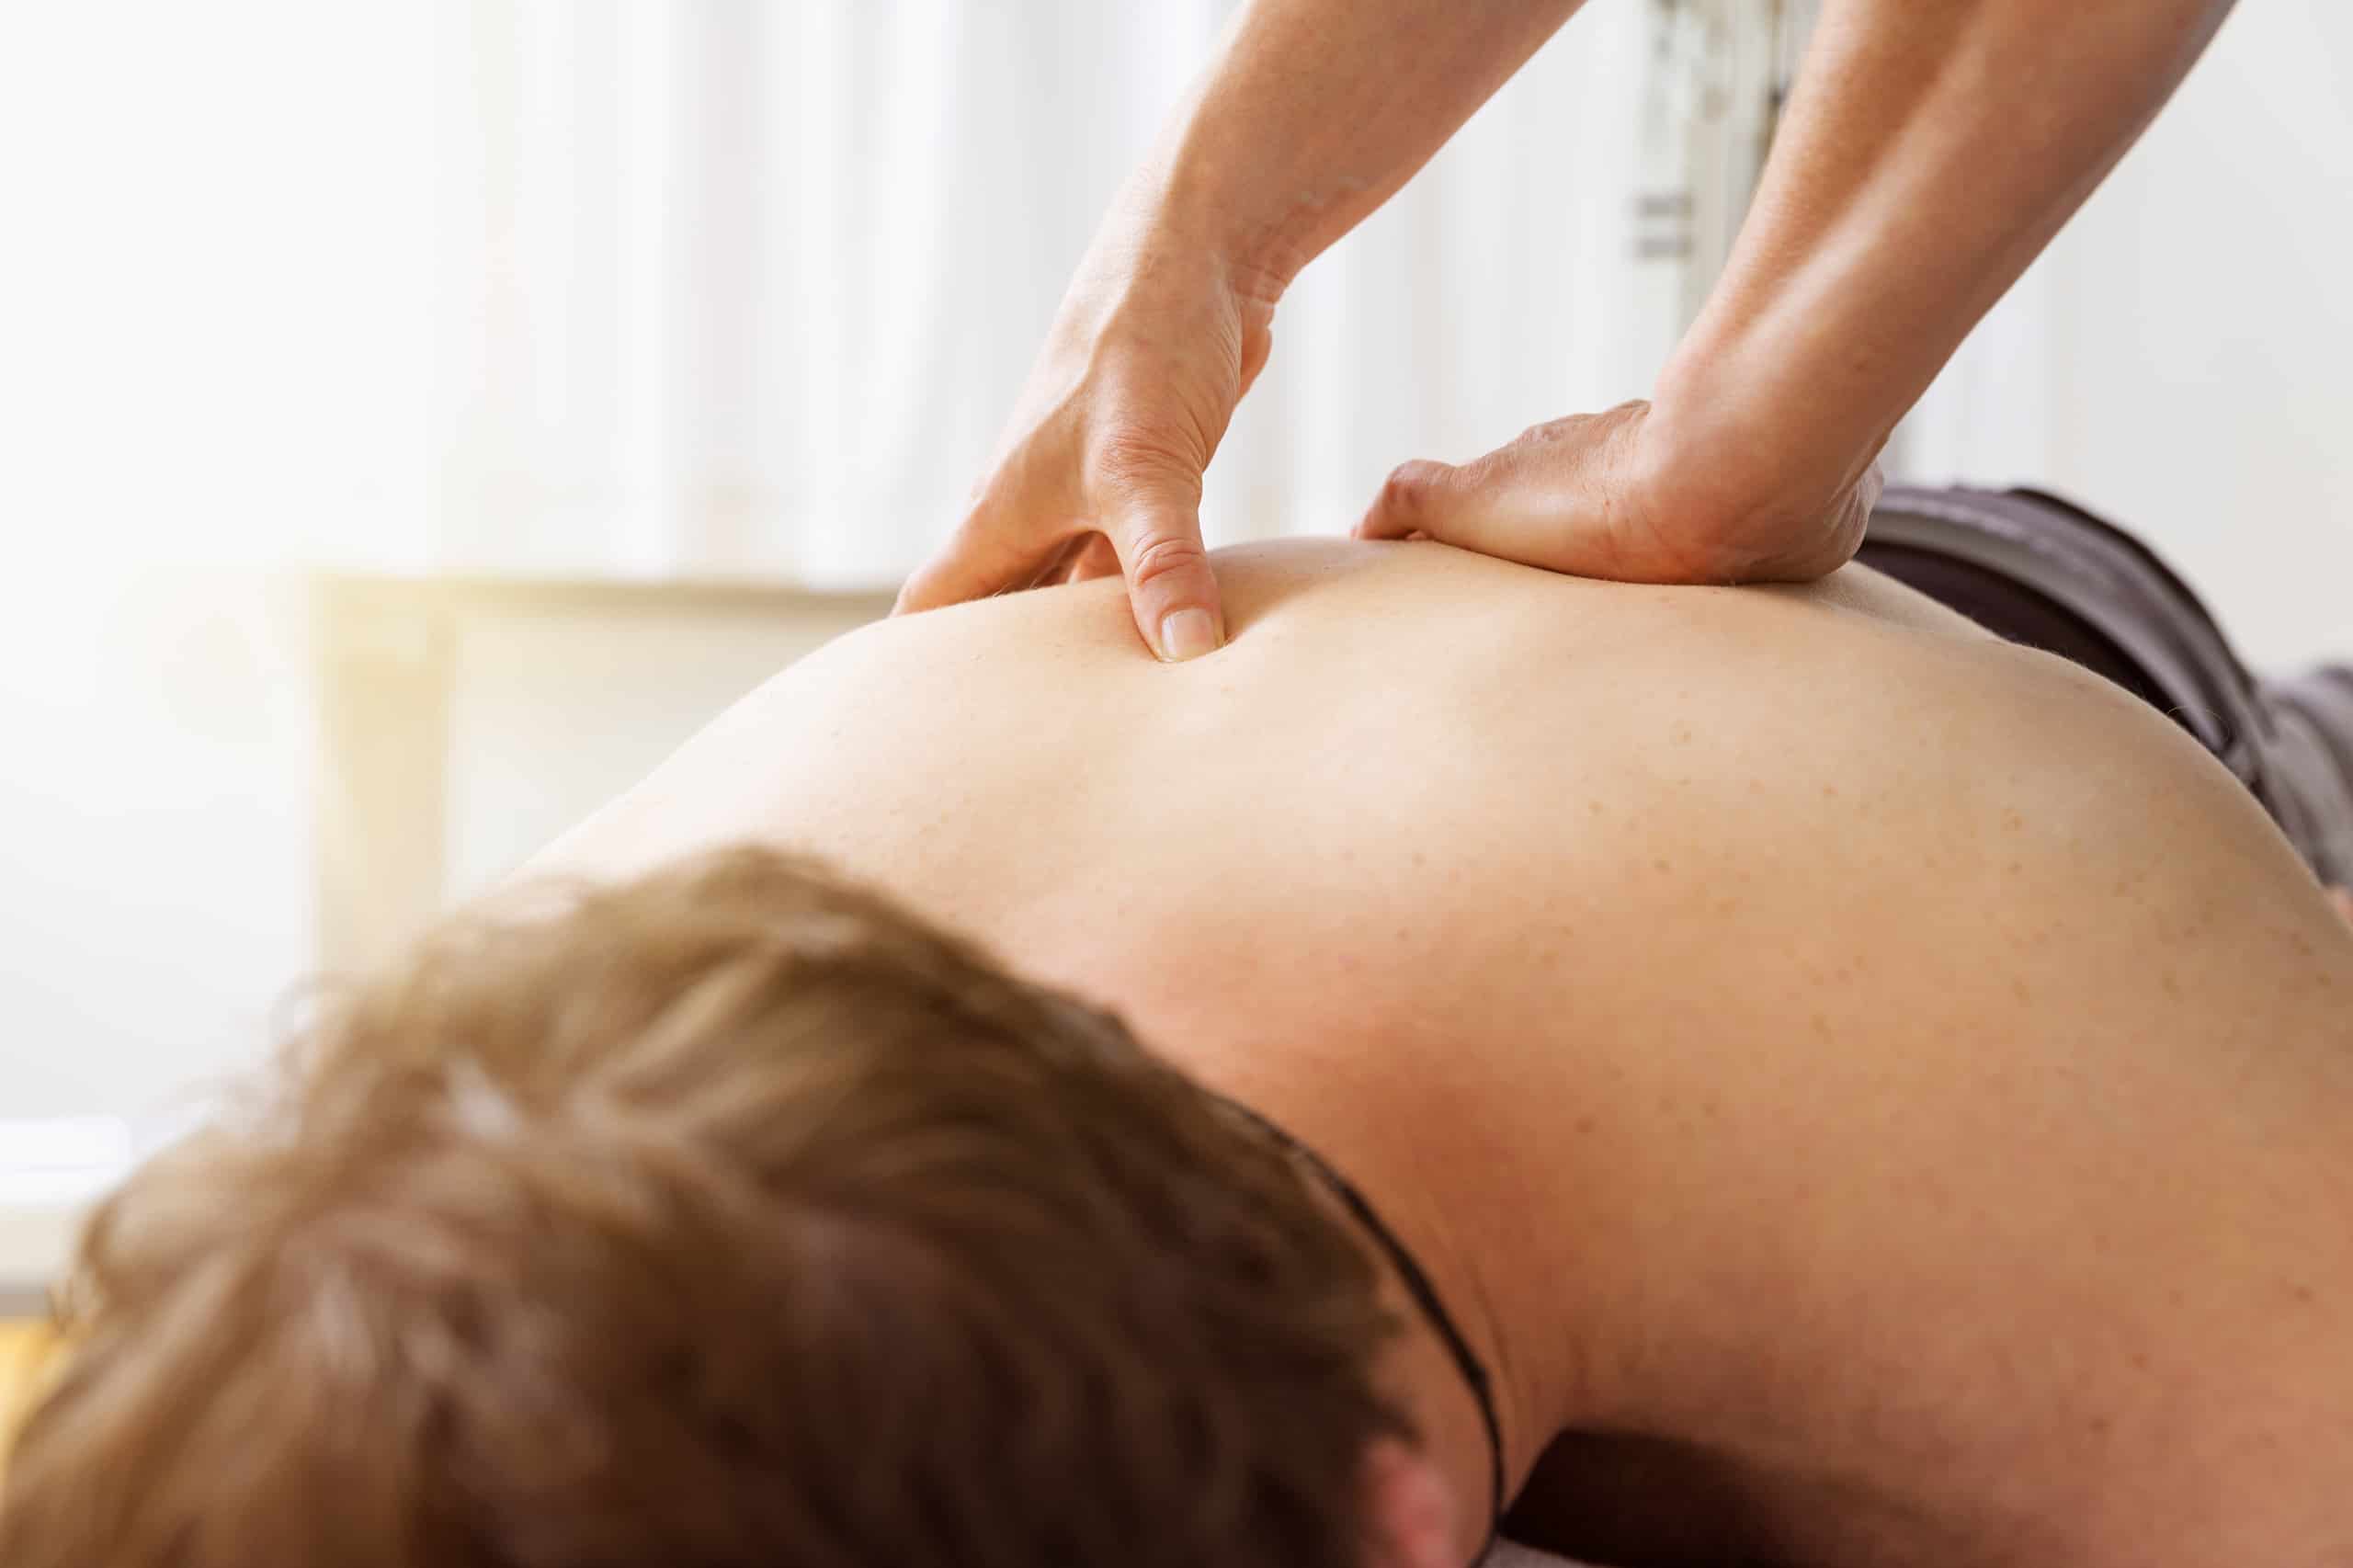 DIY Acupressure: How to Locate and Stimulate Key Points for Back Pain Relief